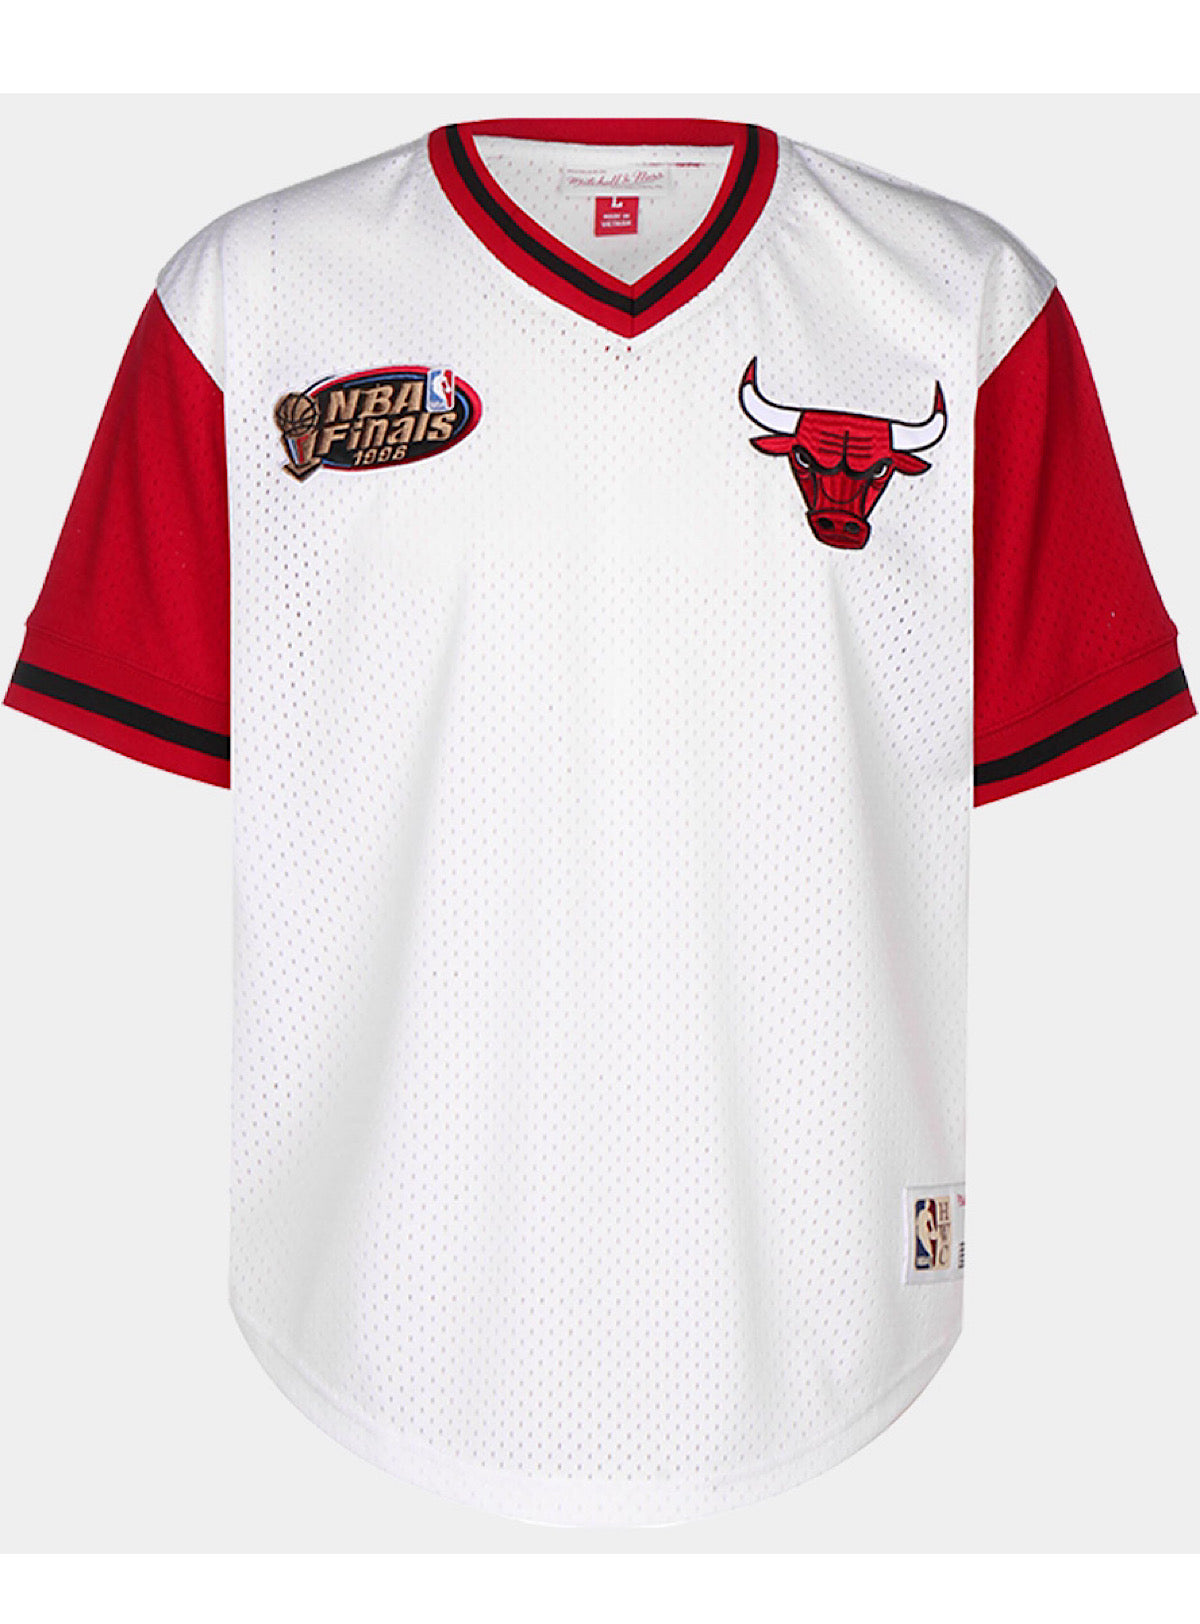 Mitchell & Ness White/Floral Print NBA Chicago Bulls Mesh Button Front Jersey 2XL / White/Floral Print